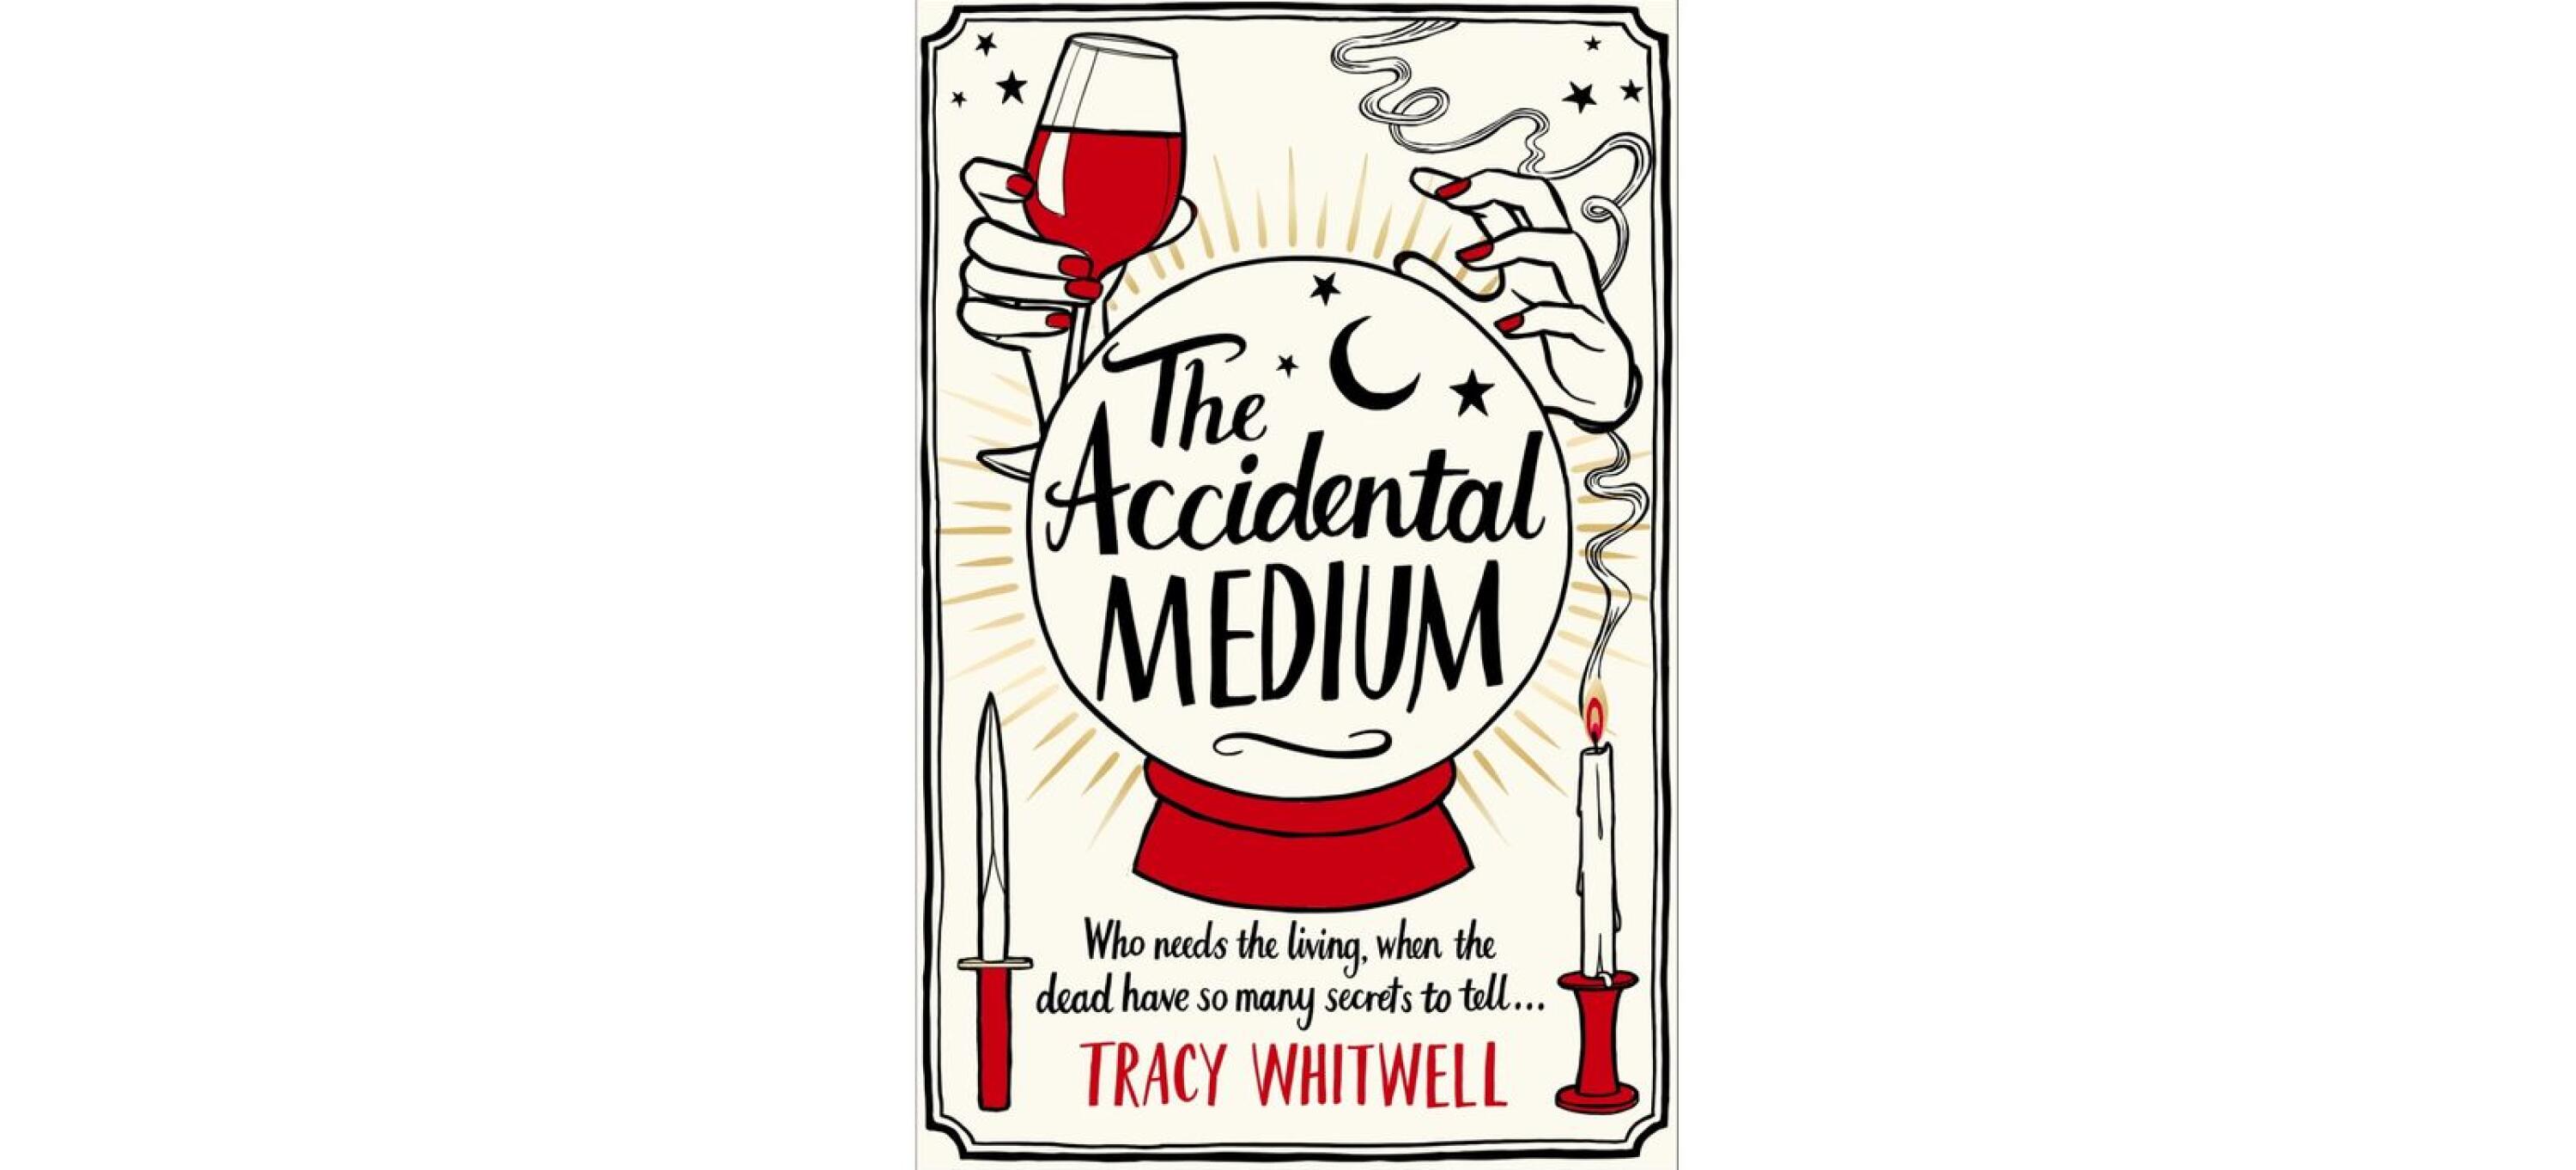 the accidental medium book review